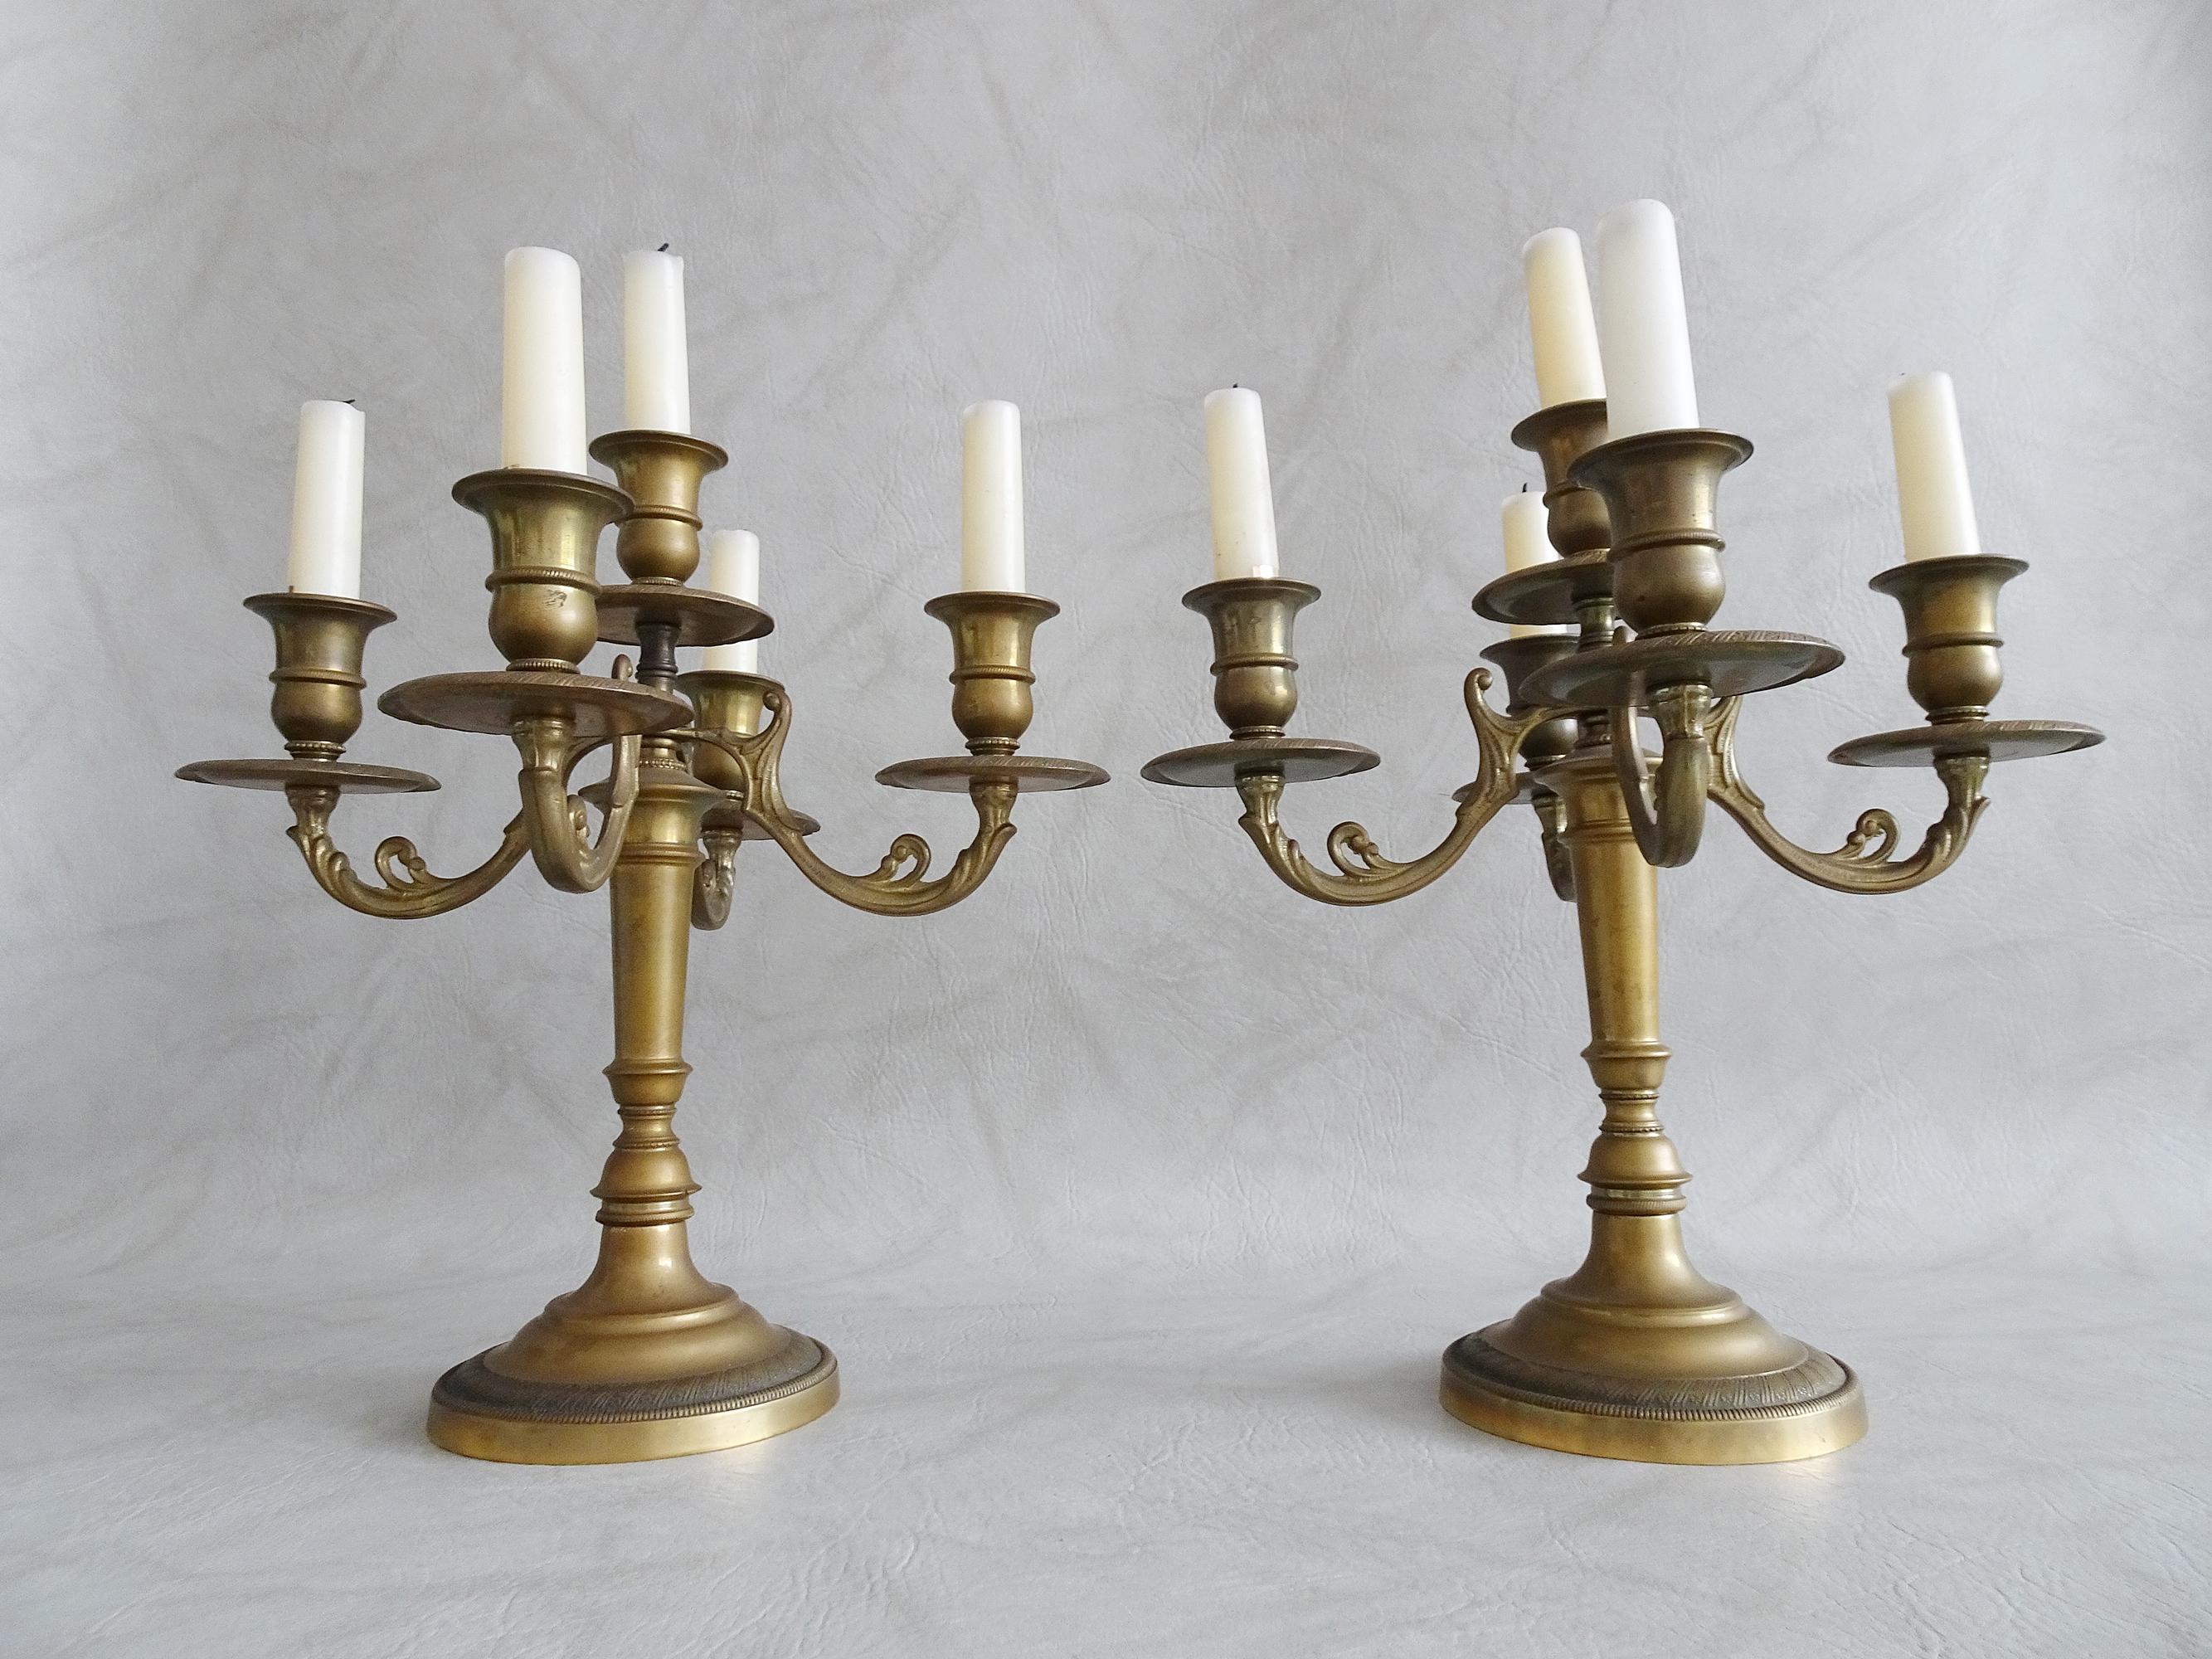 Pair of early 20th century French brass candelabra, France, 1900s.